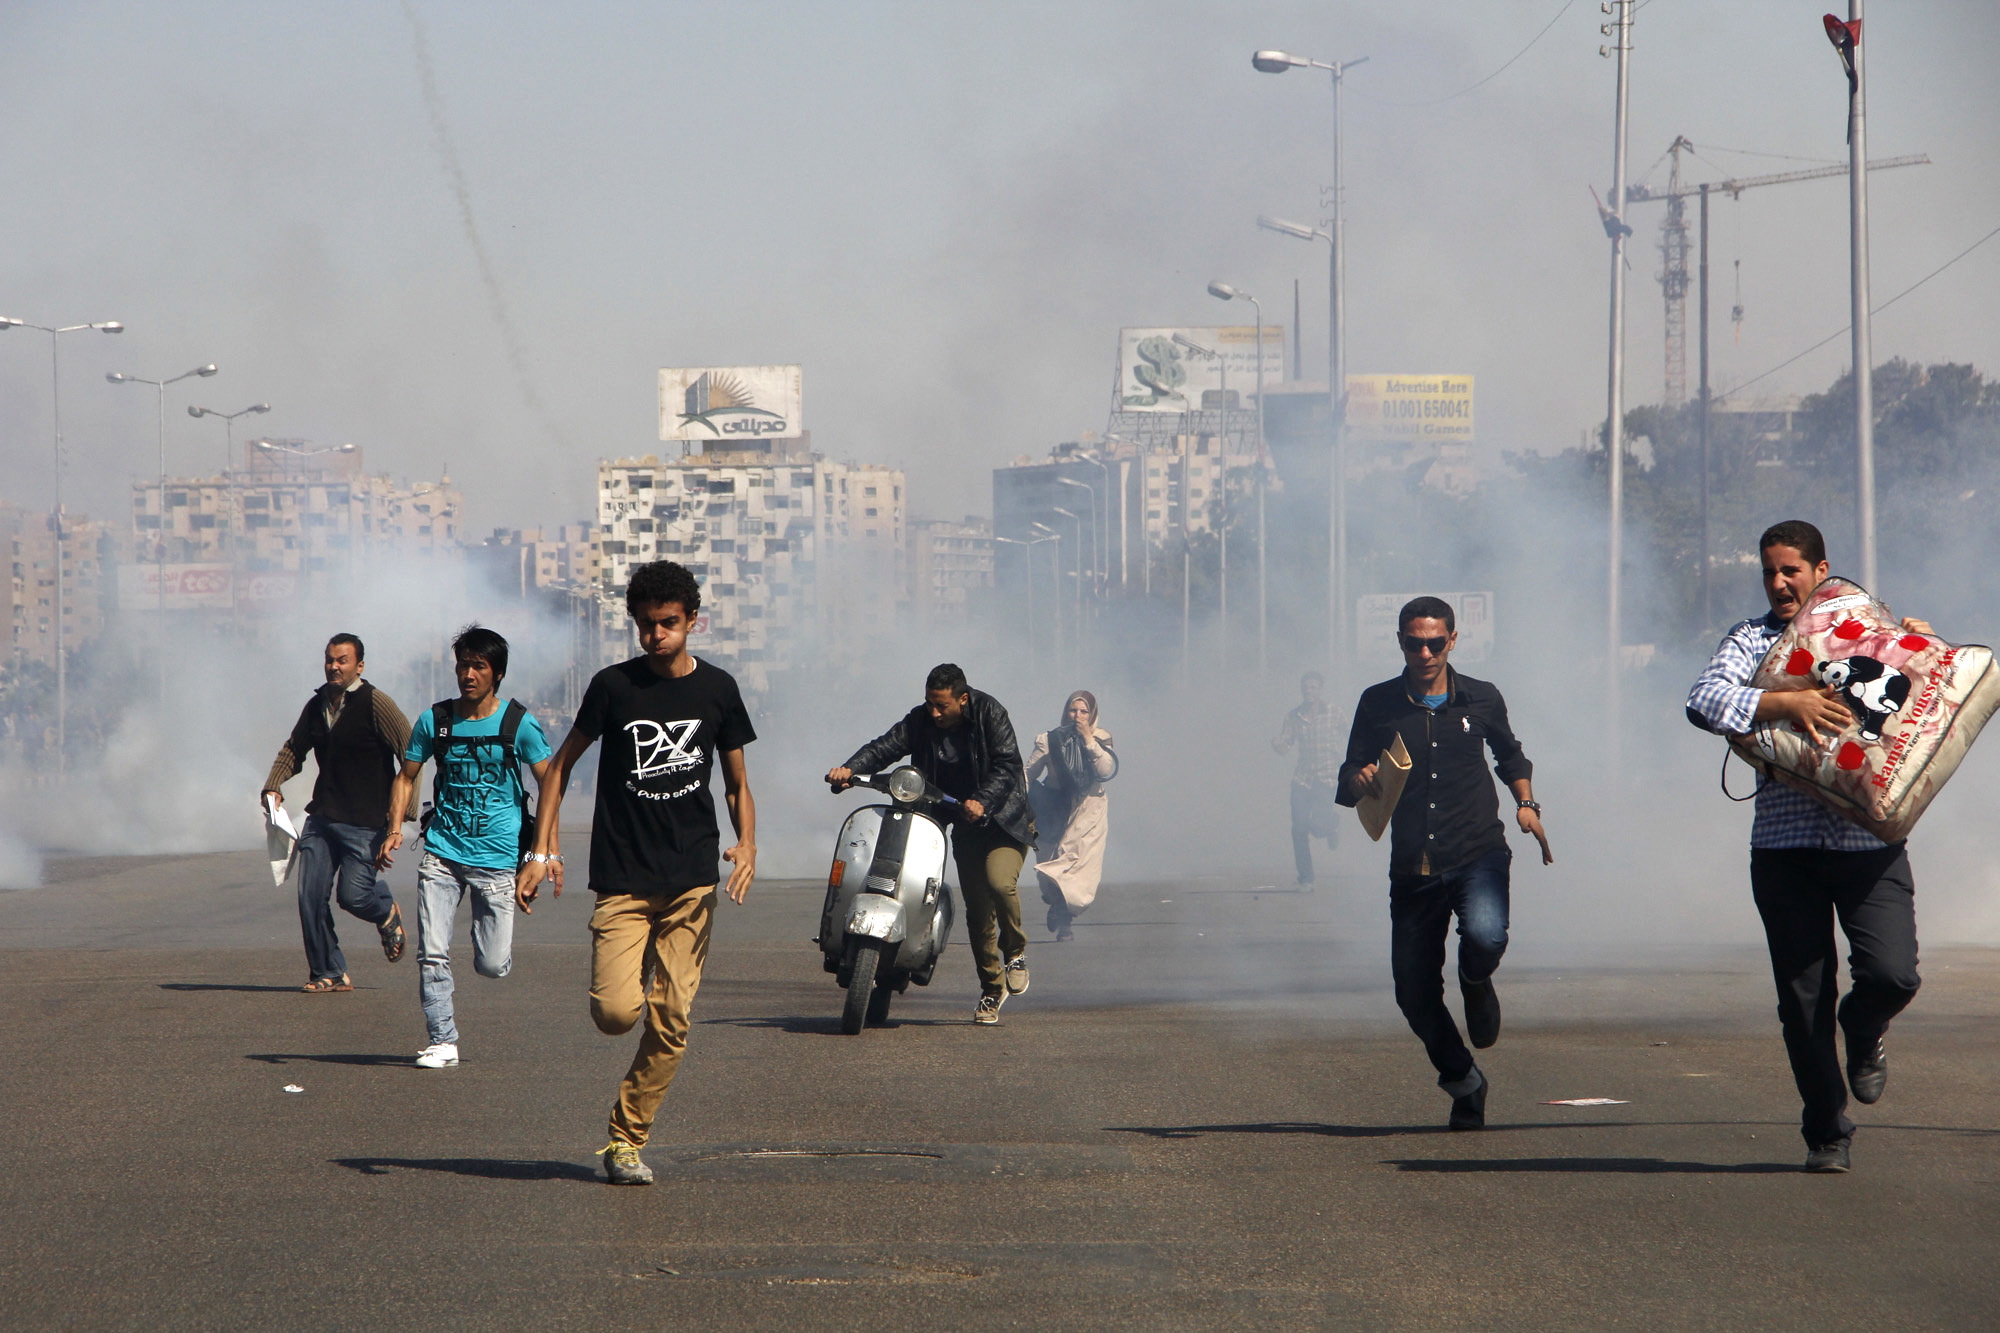 Egyptians run from tear gas after clashes erupted between Al-Azhar students and police forces during a protest Sunday in the Nasr City district of Cairo. The protests were the second in two days at Al-Azhar University, Sunni Islamis most prominent center of learning. Many supporters of ousted Egyptian President Mohammed Morsi's Muslim Brotherhood group are students at Al-Azhar, a stronghold of the group and steps from former site of an Islamists' sprawling protest camp which came under heavy crackdown by security forces on Aug.